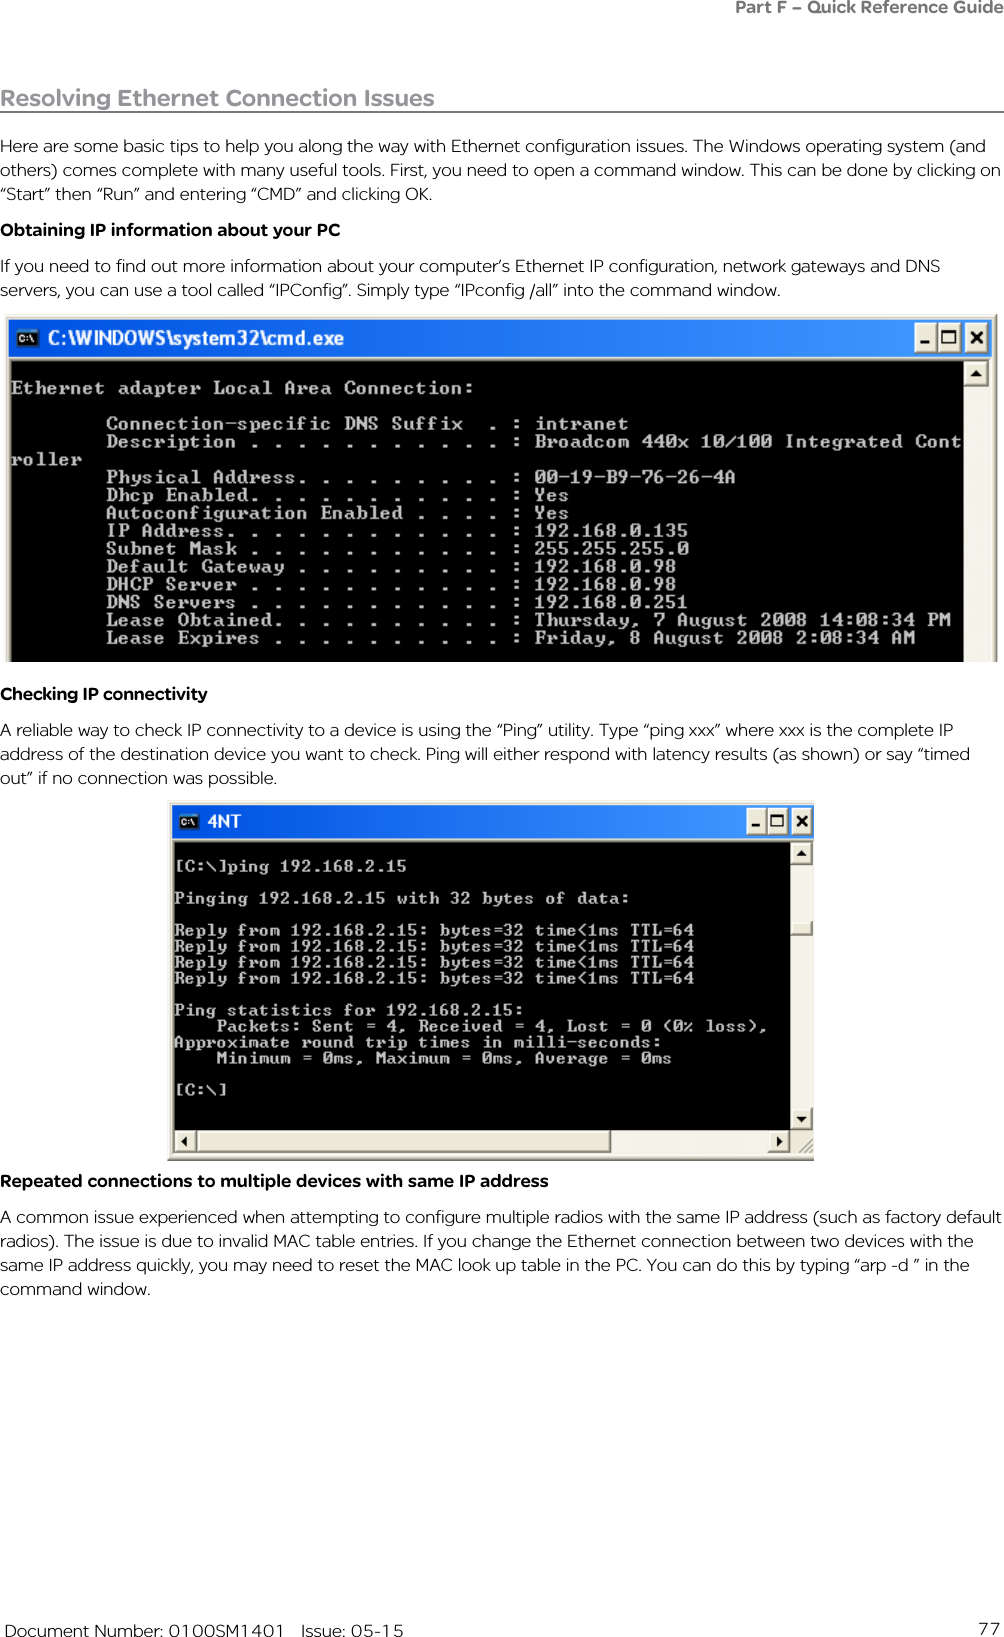 77   Document Number: 0100SM1401   Issue: 05-15Resolving Ethernet Connection IssuesHere are some basic tips to help you along the way with Ethernet configuration issues. The Windows operating system (and others) comes complete with many useful tools. First, you need to open a command window. This can be done by clicking on “Start” then “Run” and entering “CMD” and clicking OK. Obtaining IP information about your PCIf you need to find out more information about your computer’s Ethernet IP configuration, network gateways and DNS servers, you can use a tool called “IPConfig”. Simply type “IPconfig /all” into the command window.Checking IP connectivityA reliable way to check IP connectivity to a device is using the “Ping” utility. Type “ping xxx” where xxx is the complete IP address of the destination device you want to check. Ping will either respond with latency results (as shown) or say “timed out” if no connection was possible.  Repeated connections to multiple devices with same IP addressA common issue experienced when attempting to configure multiple radios with the same IP address (such as factory default radios). The issue is due to invalid MAC table entries. If you change the Ethernet connection between two devices with the same IP address quickly, you may need to reset the MAC look up table in the PC. You can do this by typing “arp -d ” in the command window. Part F – Quick Reference Guide